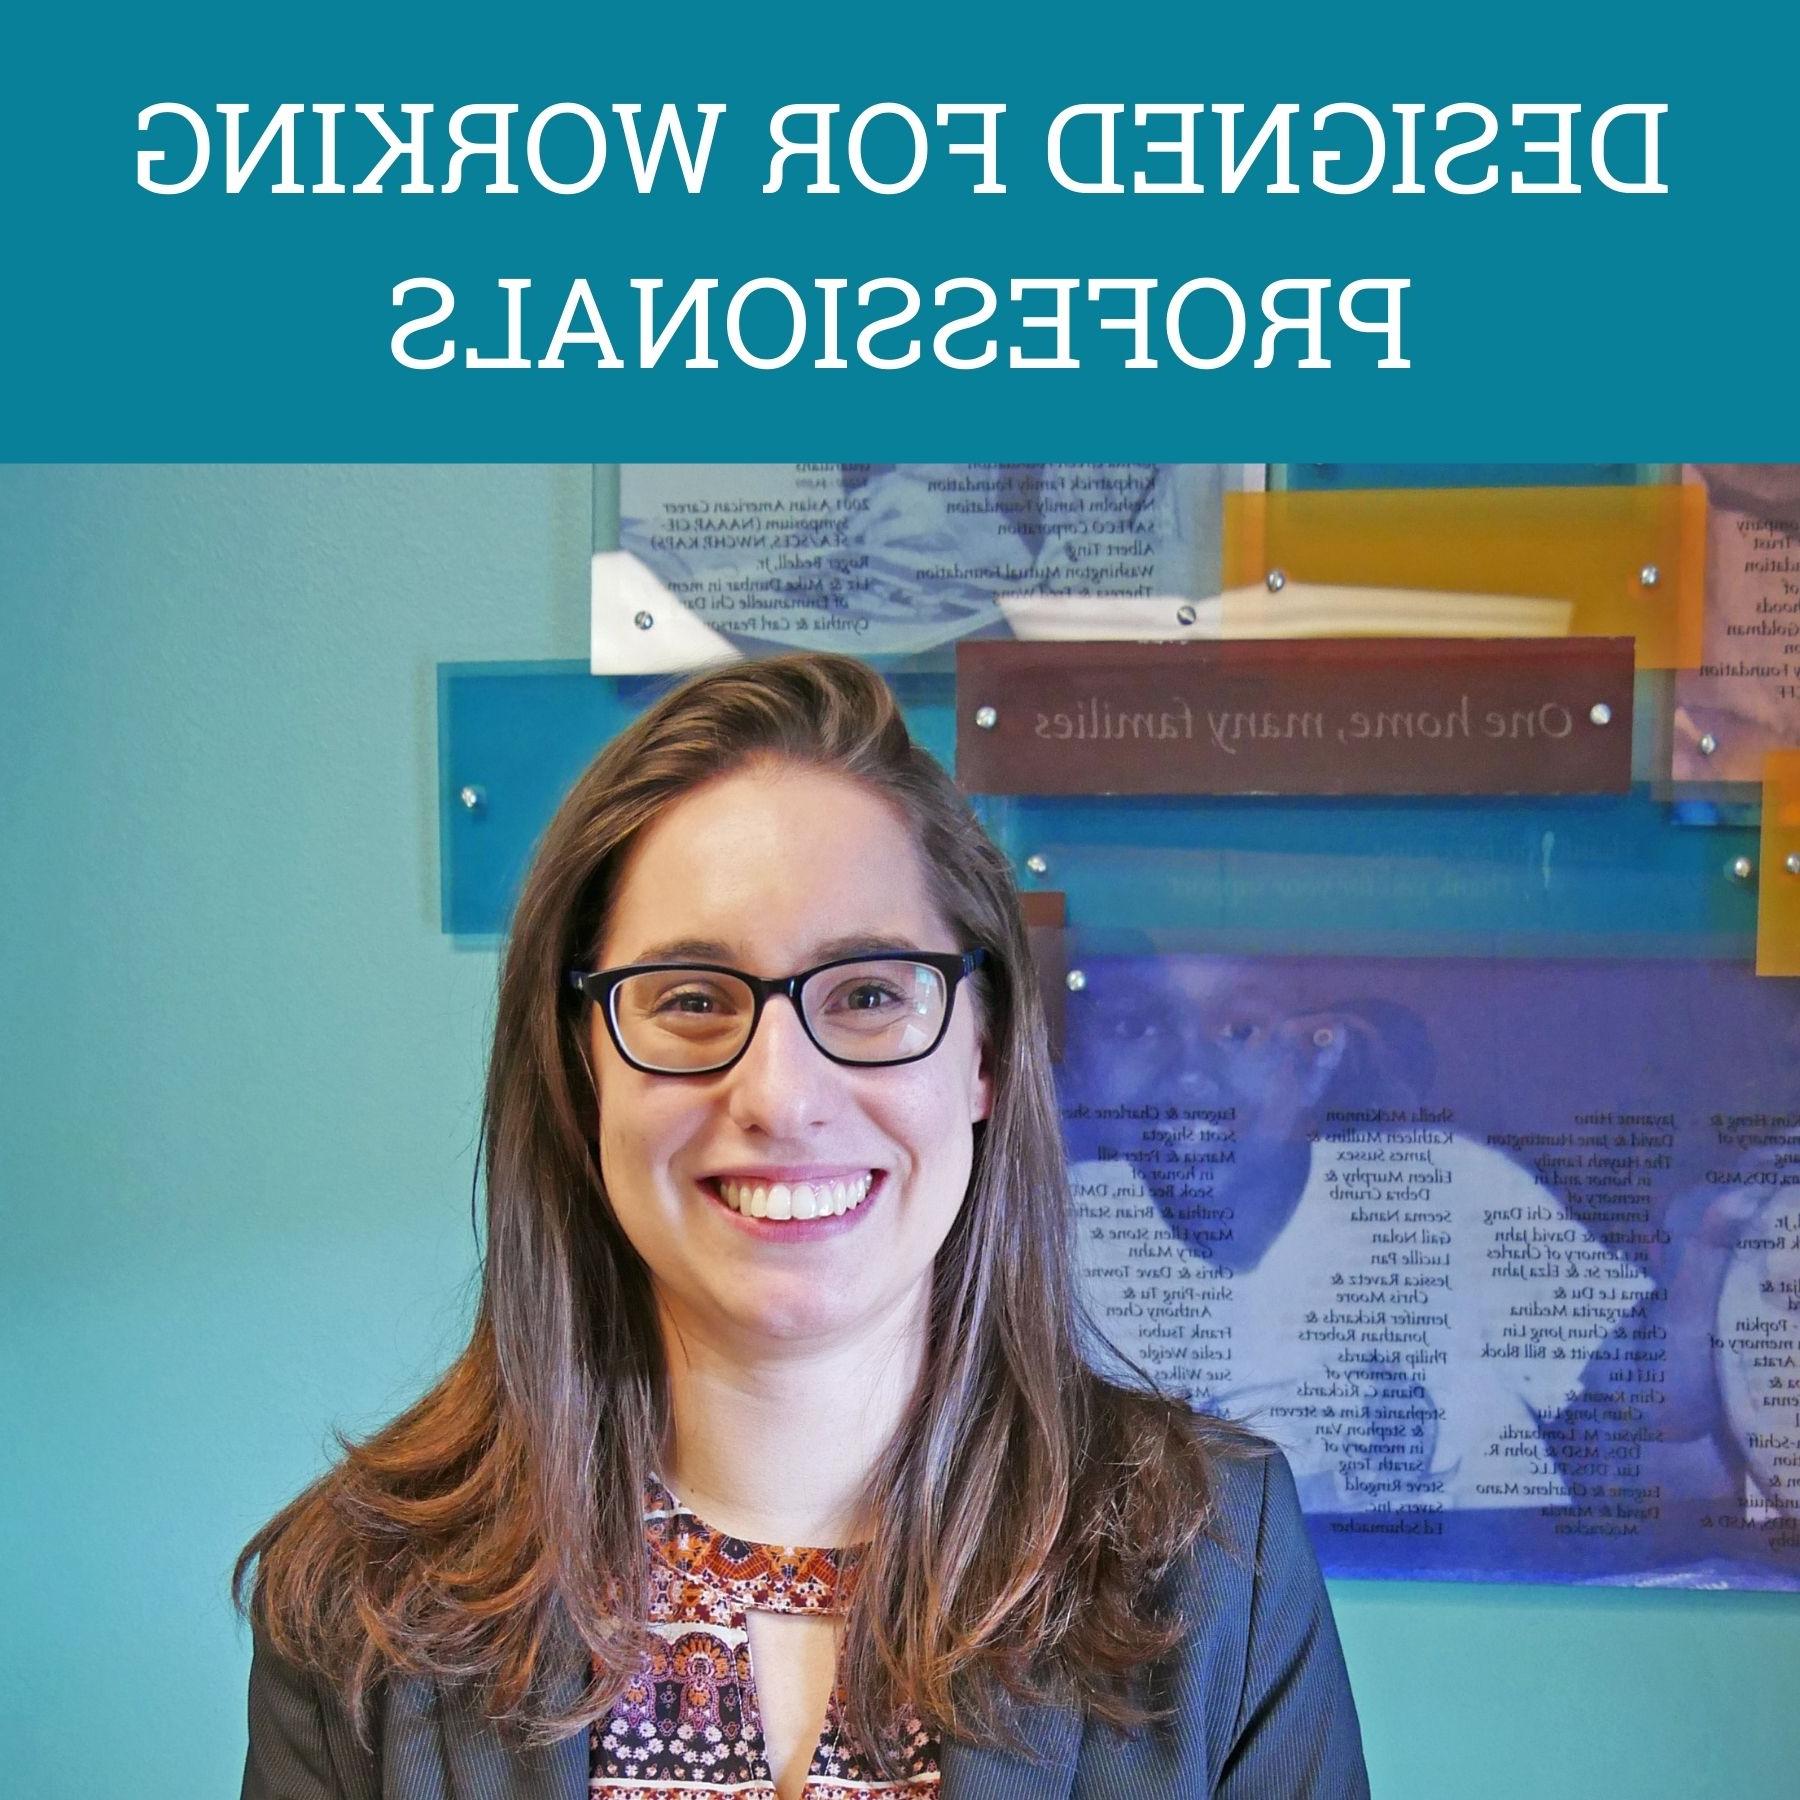 Photo of Zoey Ferenczy with text Designed for working professionals